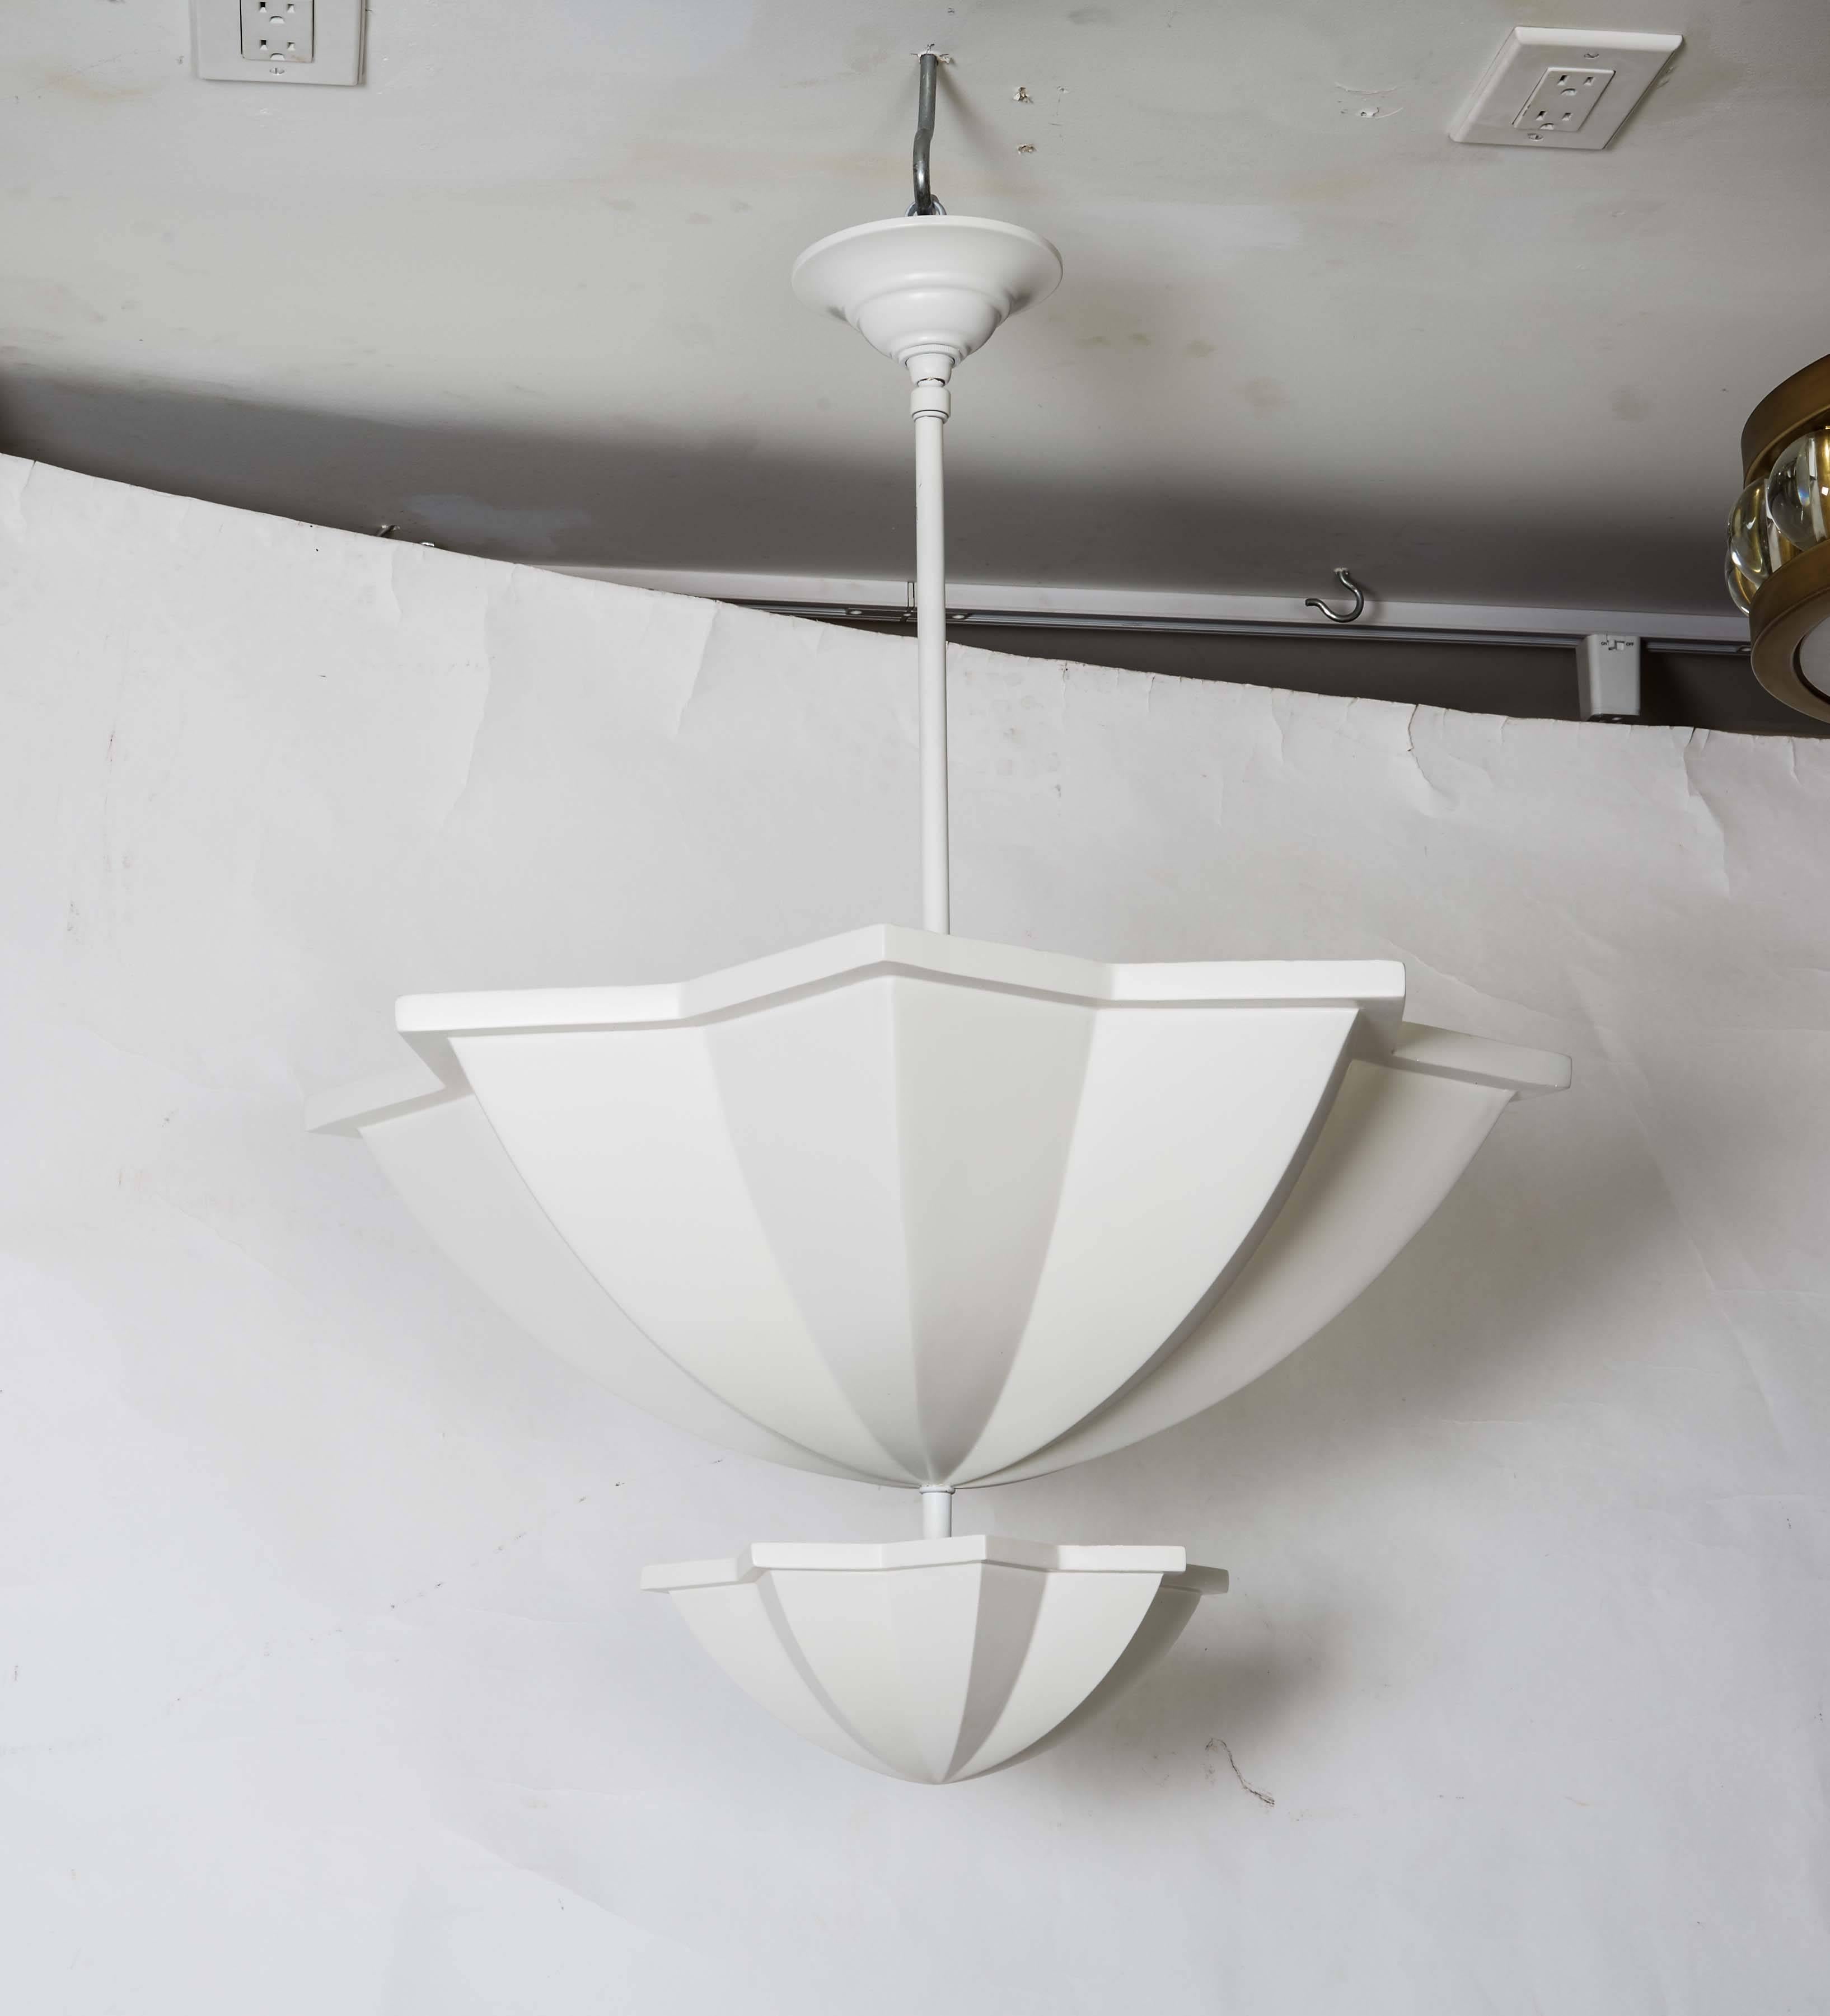 A two-tiered ceiling fixture inspired by the Moroccan star design made of aquaresin and brass with a chaulky white plaster-look painted finish. The larger section conceals four Edison base sockets with a max of 100 watts per bulb, and the smaller